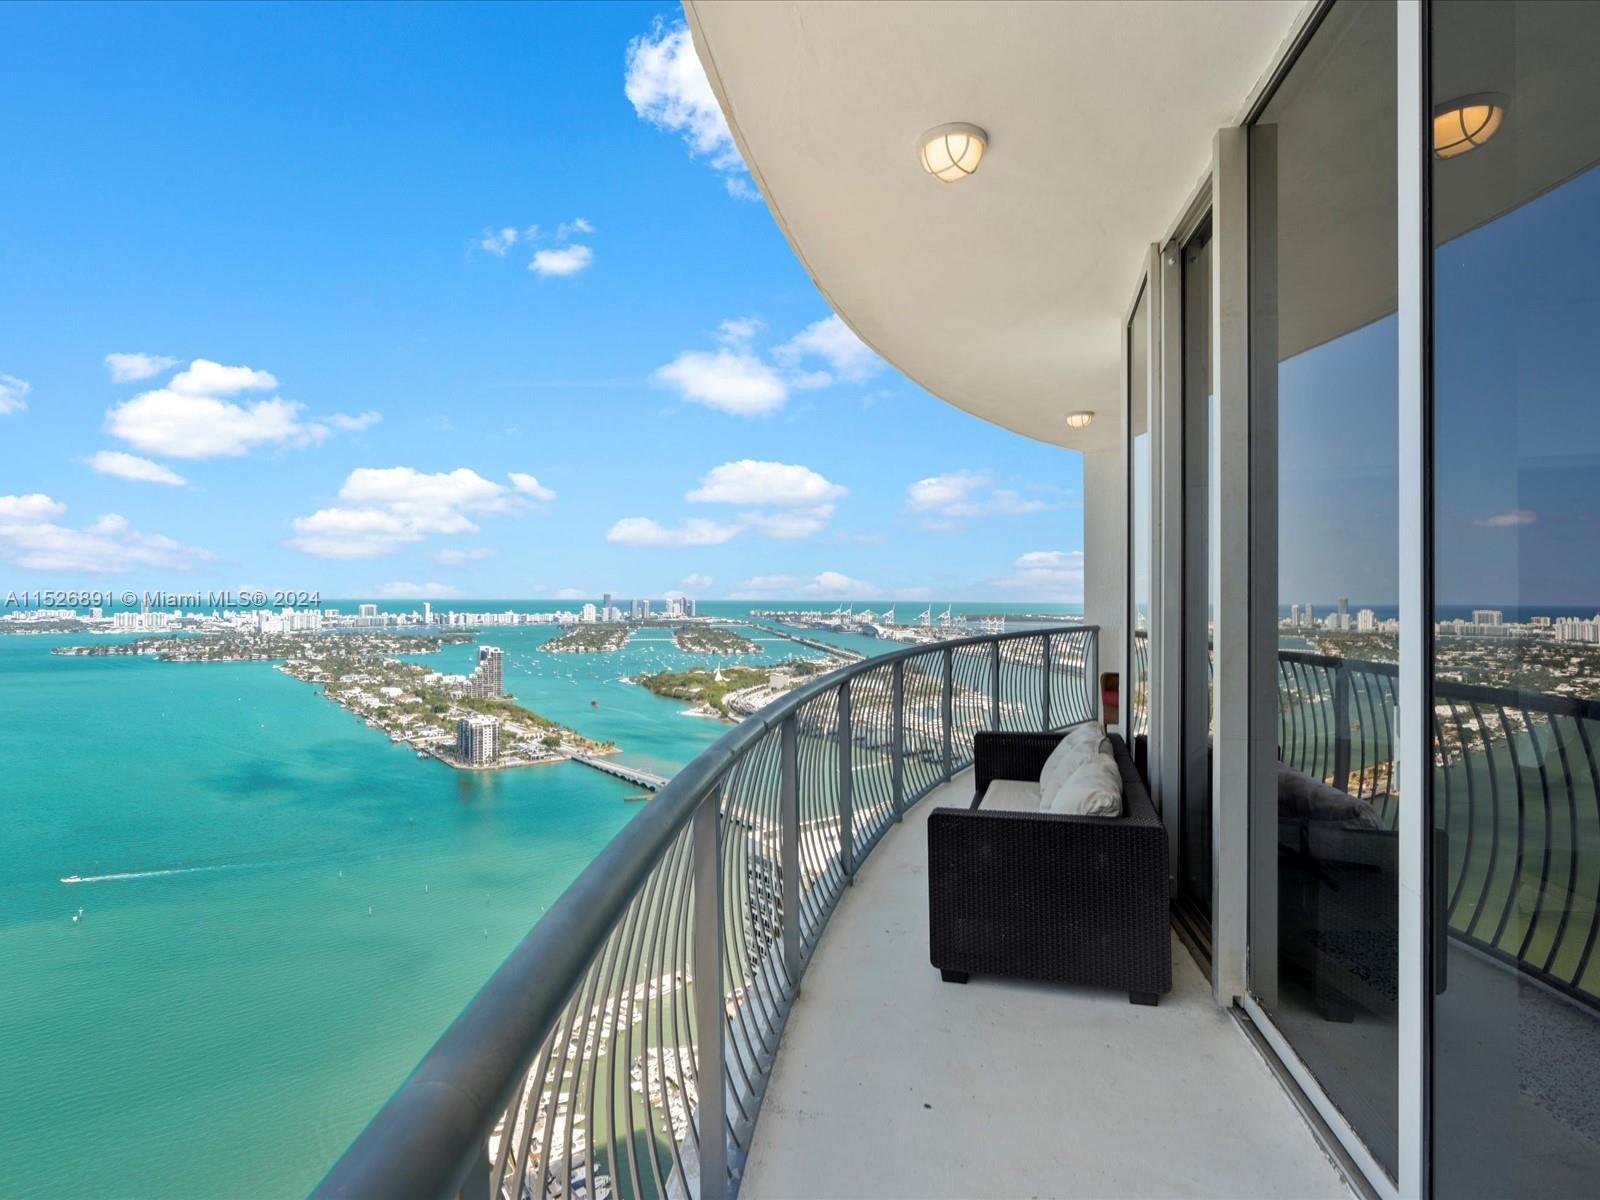 Now Available! Top floor Penthouse unit on 56th level in the coveted '01 line. Endless Eastern views of Biscayne Bay & Miami Beach. Furnished or unfurnished 2 bd/ 2 ba, 12-foot high ceilings, washer/dryer in unit, & premium parking space on 2nd level. The Opera Tower has a new state-of-the-art fitness center & pool, facial recognition entry, 24 hr Mini Market, wine market, barber shop, restaurant and bar on-site, 24/7 Valet, & Security. Outside your front door is Pura Vida, Cassadonna, and Margaret Pace Park w/ Tennis, Volleyball, Basketball, Jogging Path, Dog Park, BBQ, etc. In popular Edgewater area, minutes from Downtown, Arts & Entertainment District, Wynwood, Midtown & Design District, 10 min to South Beach & steps to pedestrian-friendly Venetian Causeway. No Short Term.